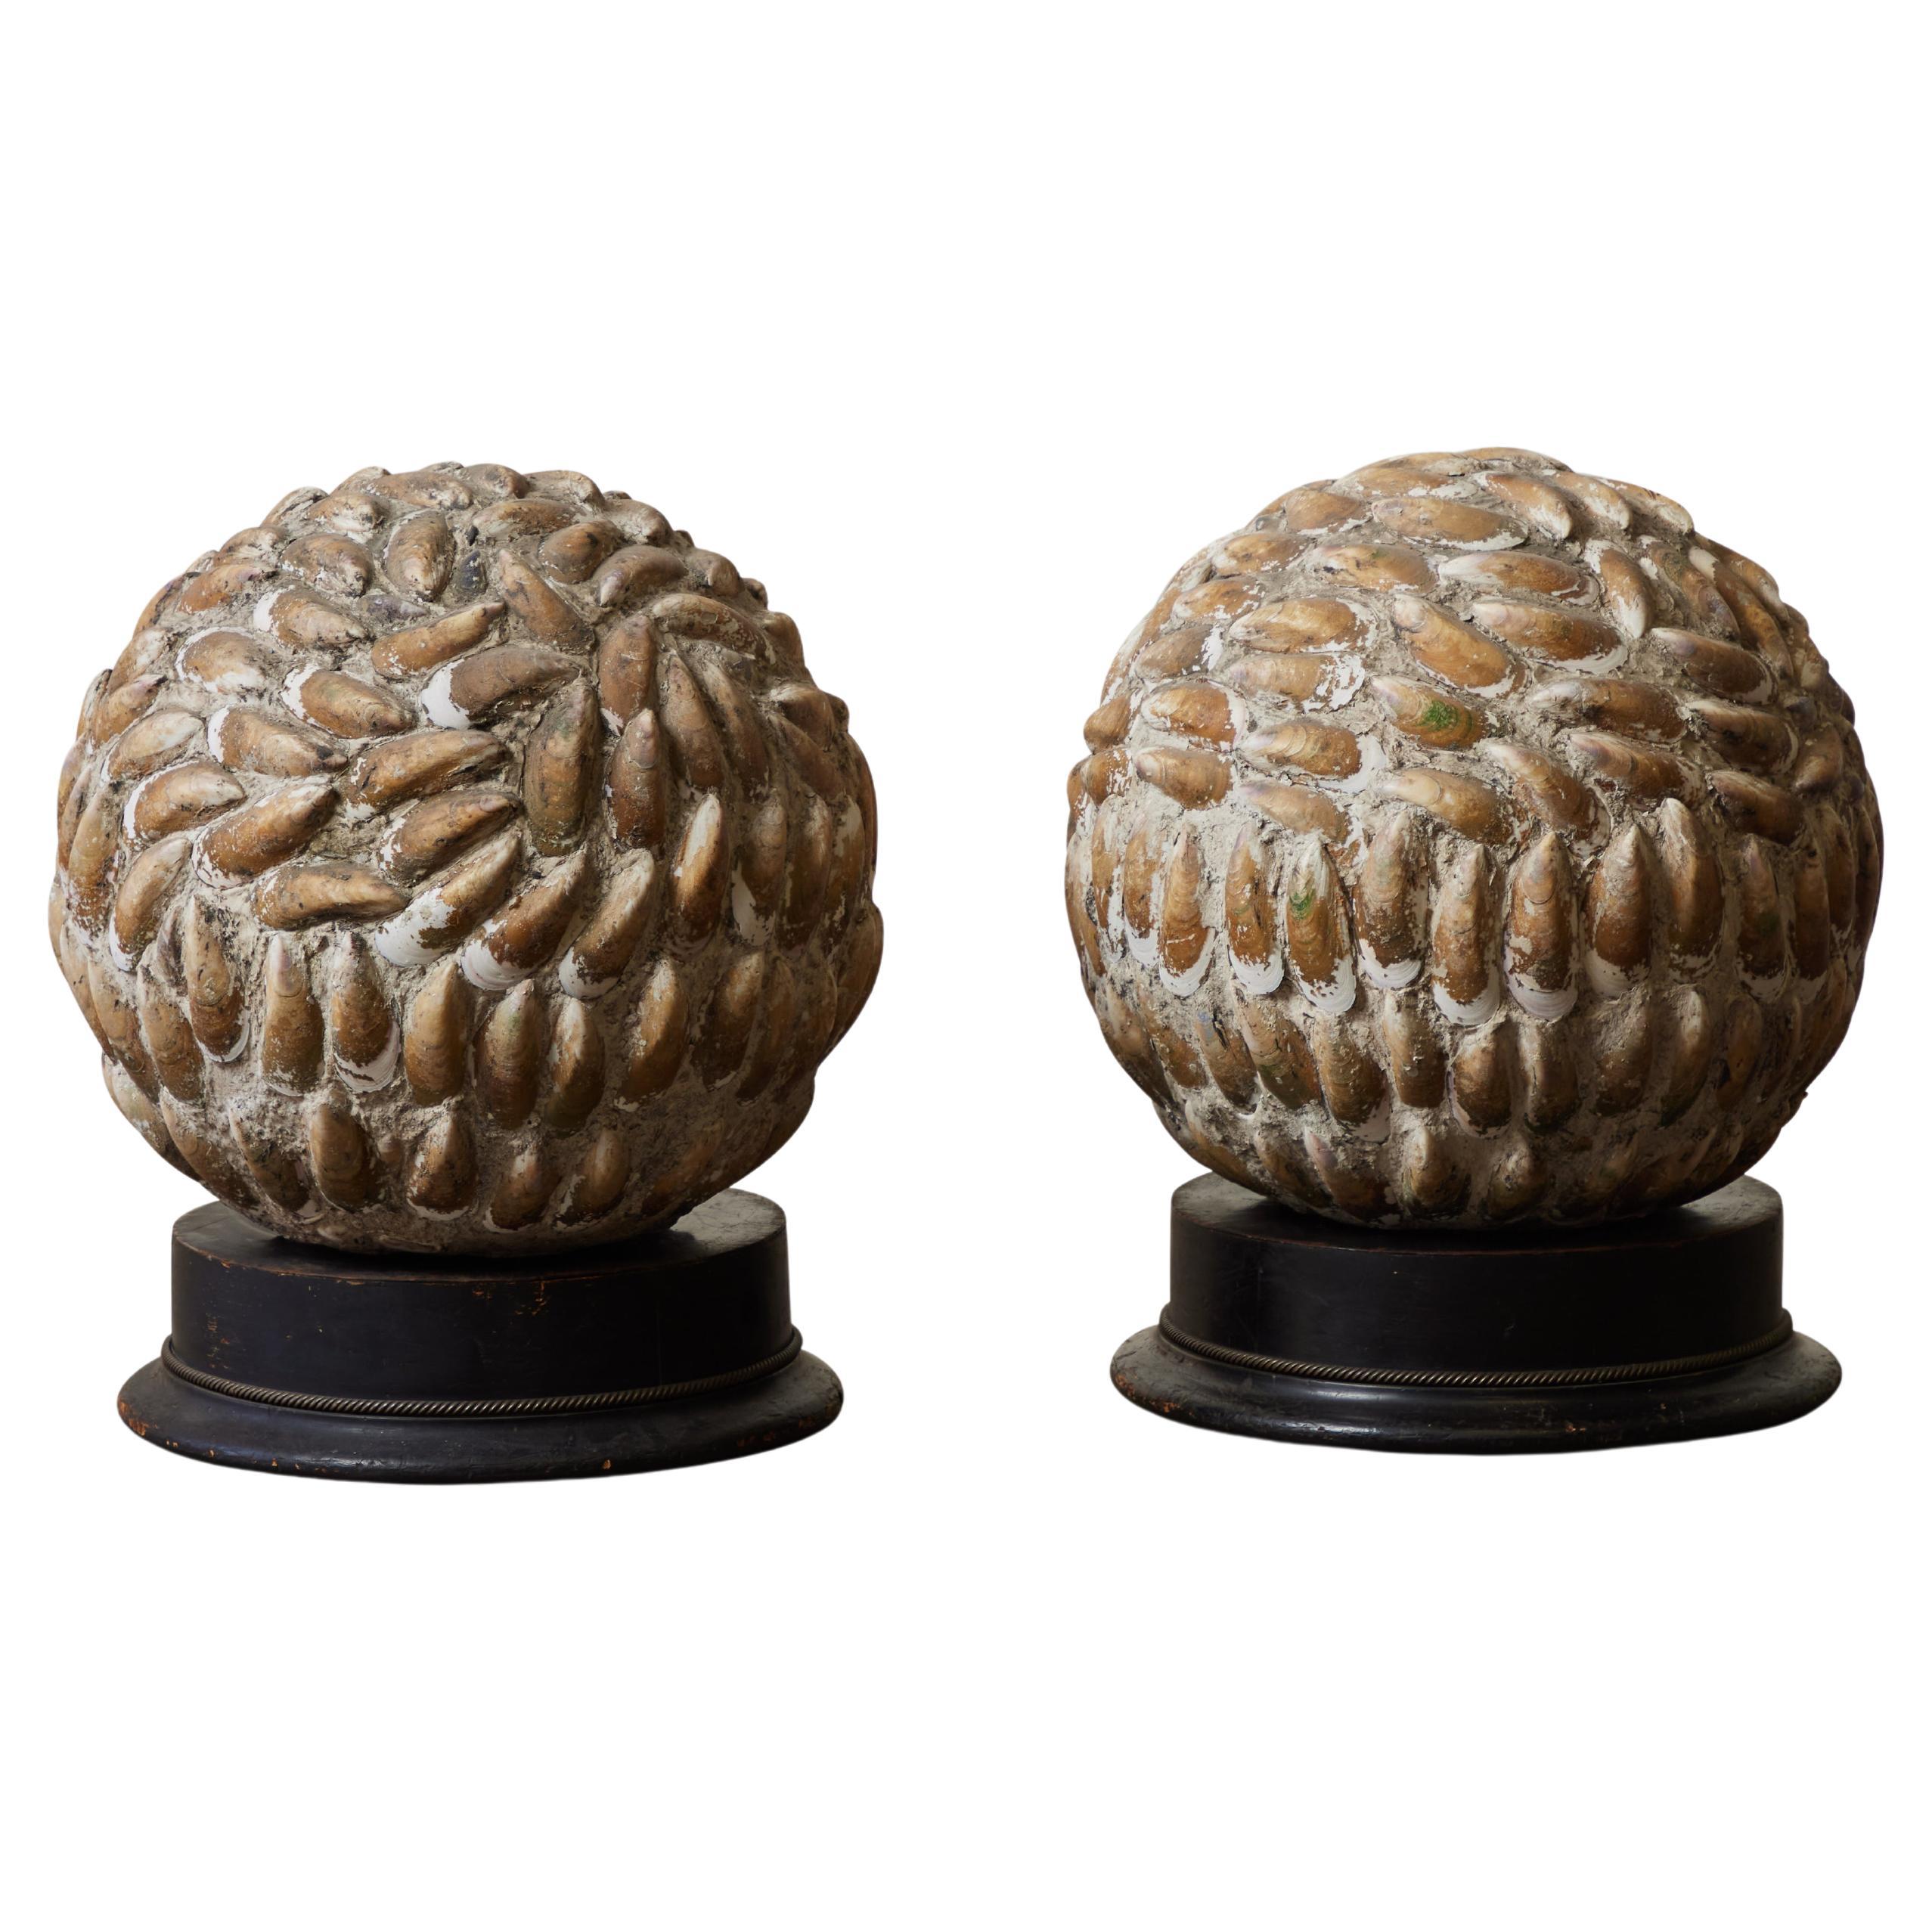 Pair of Mounted Spherical Shell Sculptures